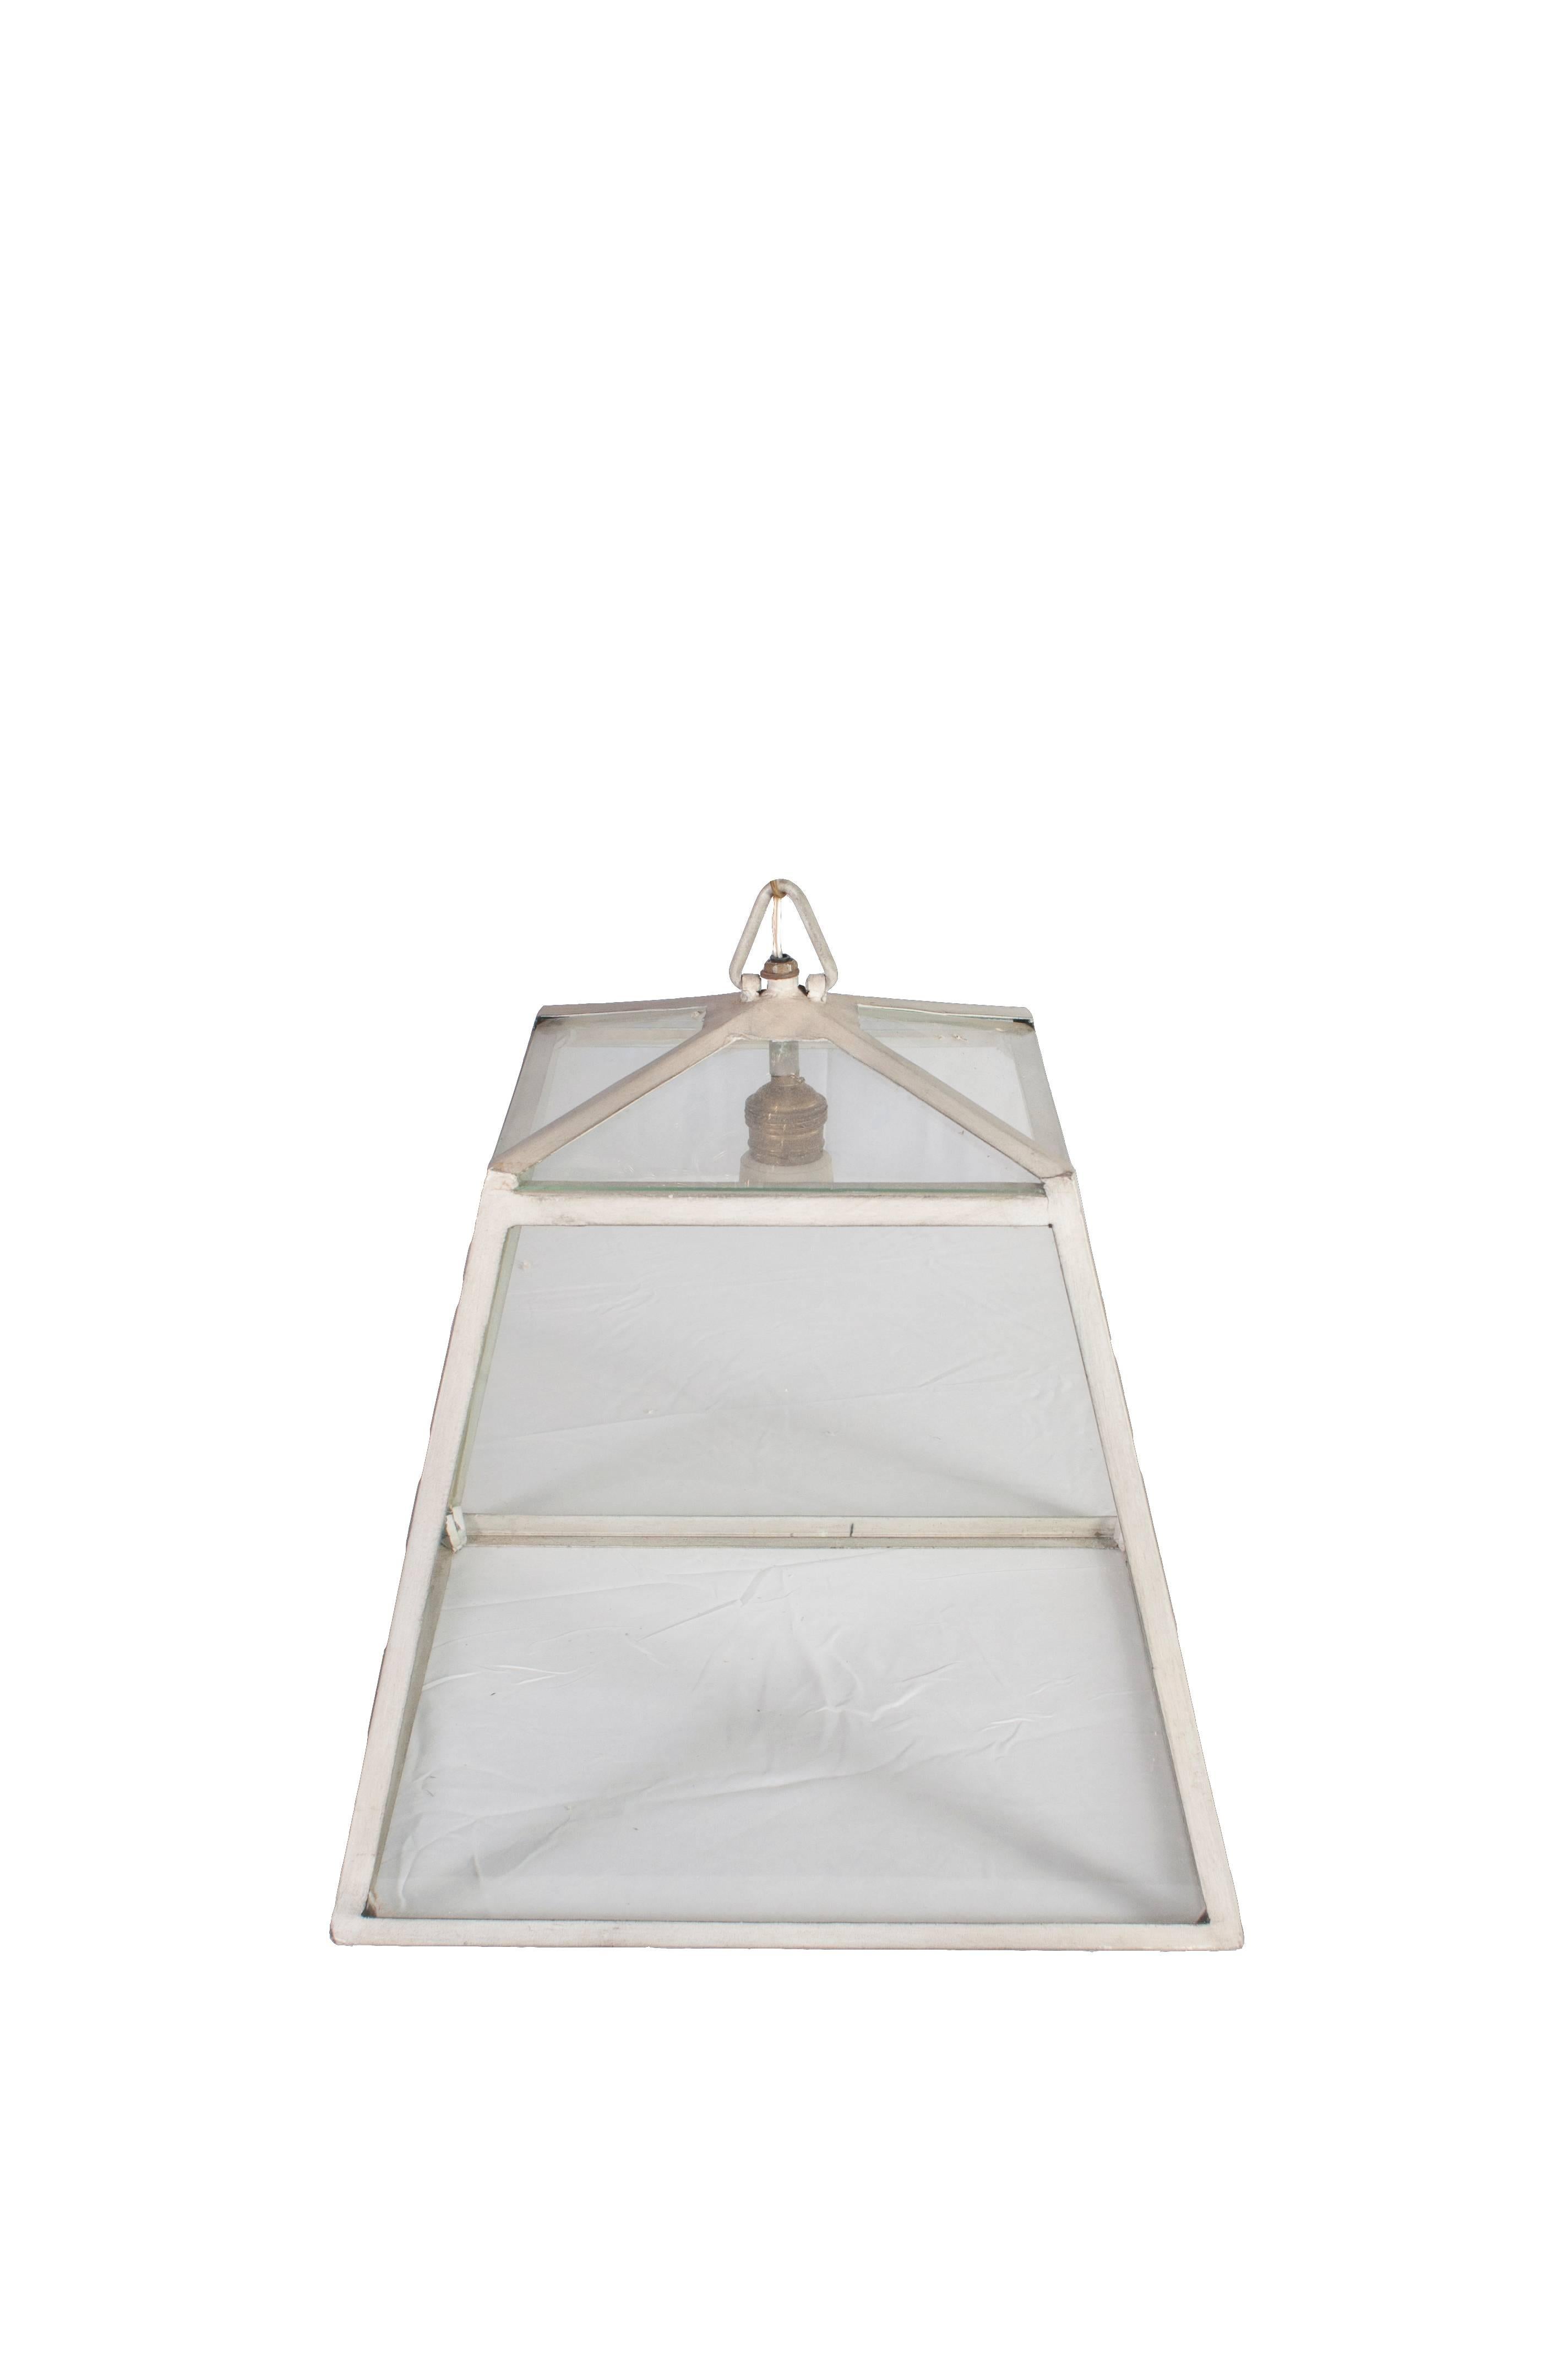 Trapezoidal glass and metal frame Herve Baume lanterns. Rewired to US specifications.